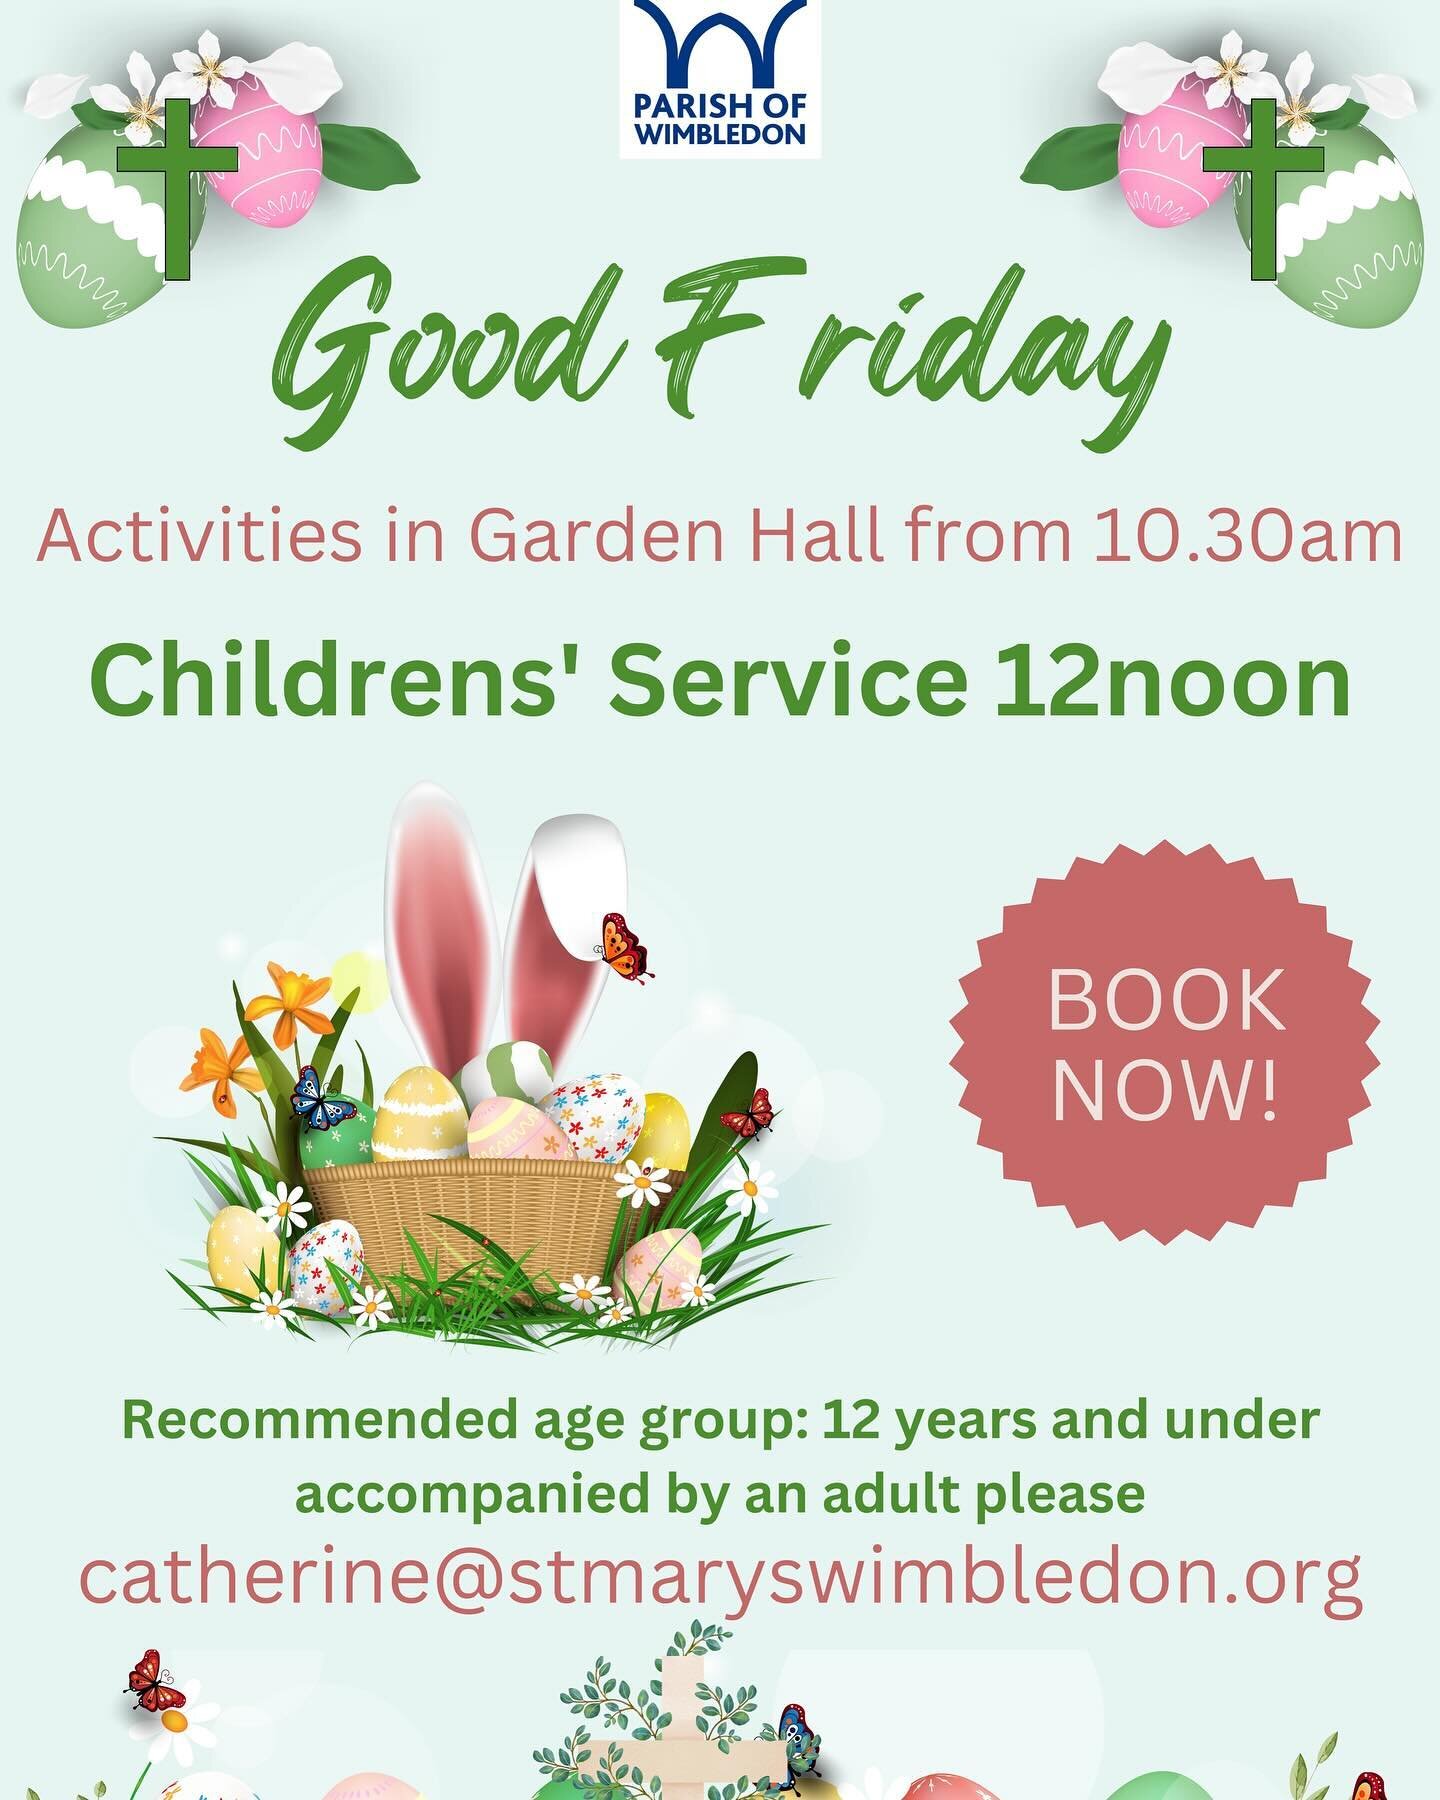 #goodfriday #children #family #easter #wimbledonvillage sign up by email by tomorrow!